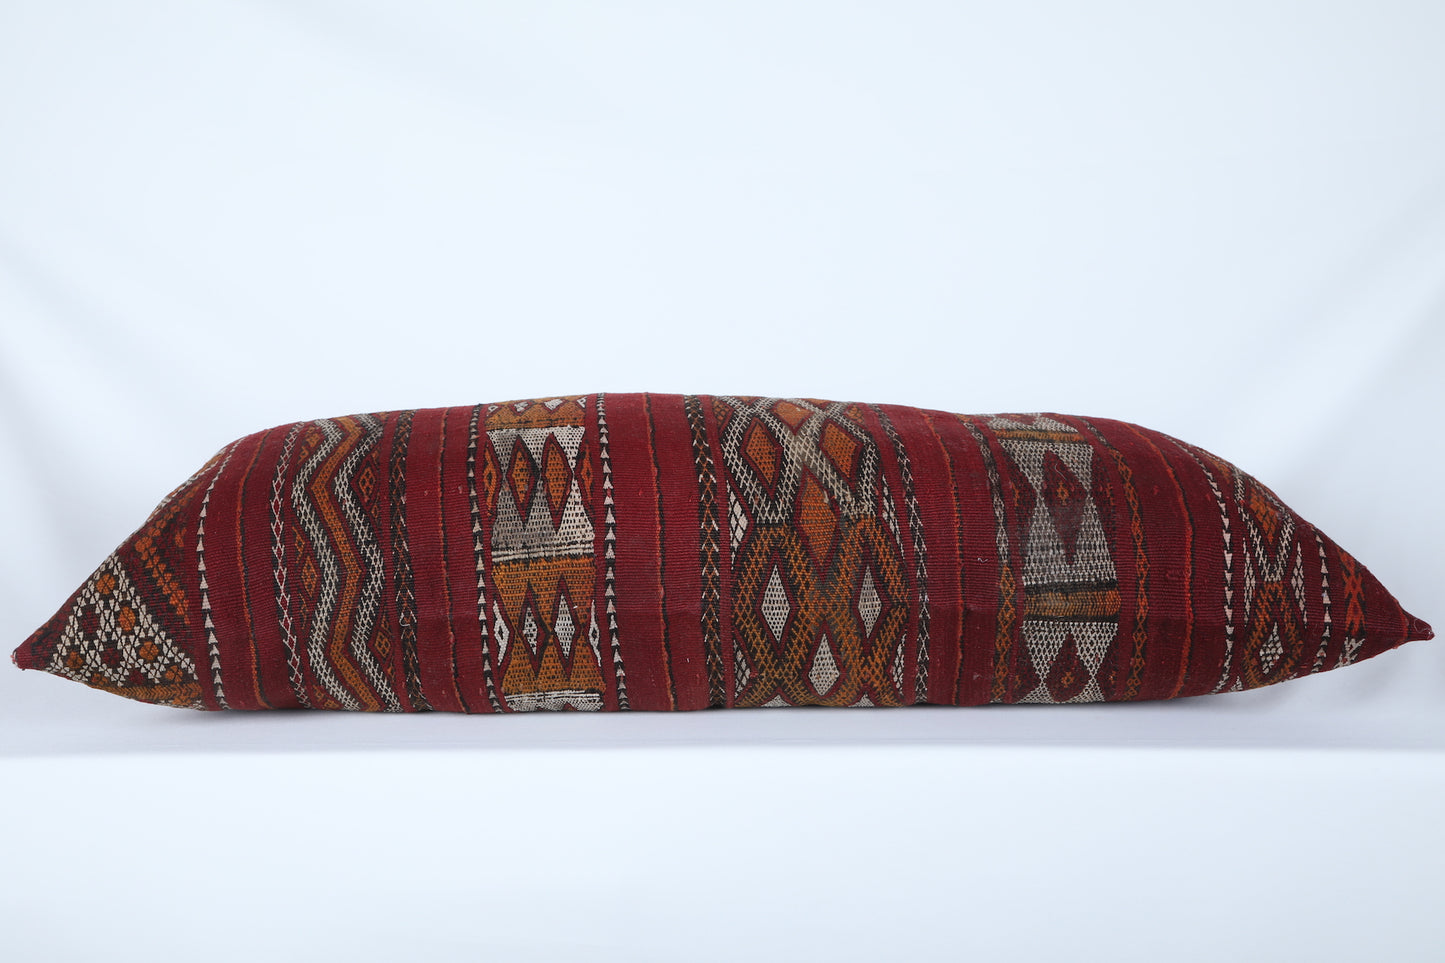 Long Moroccan rug pillow 15.3 INCHES X 32.2 INCHES